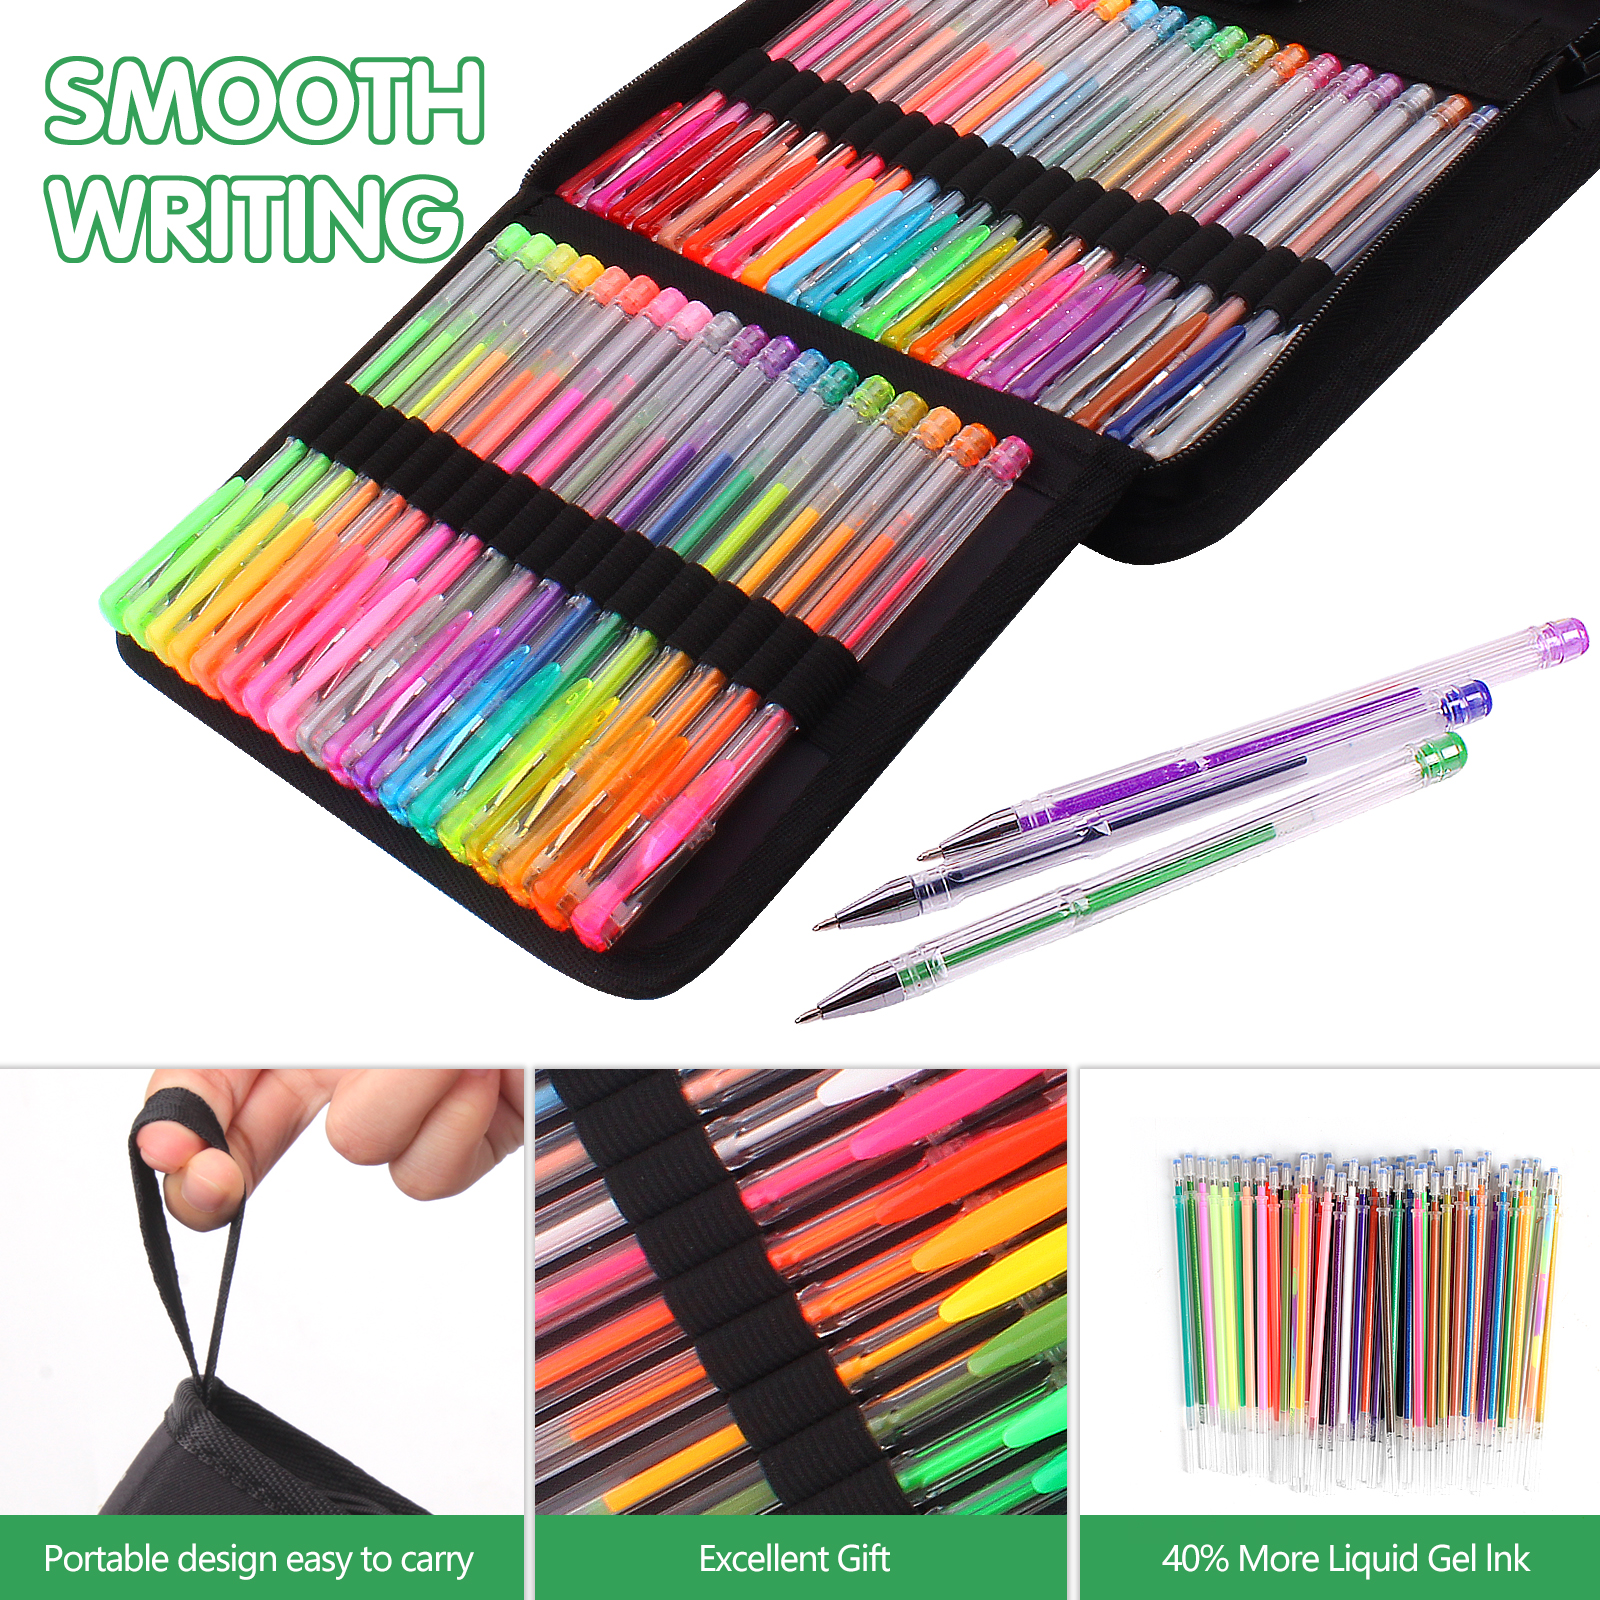 120 Carrying Case(60 Color Gel Pens and 60 ink Refills), 0.8-1MM Bullet  Tip, Assorted Fashion Colors, Coloring, Drawing, DIY Make, For Kids Adult 